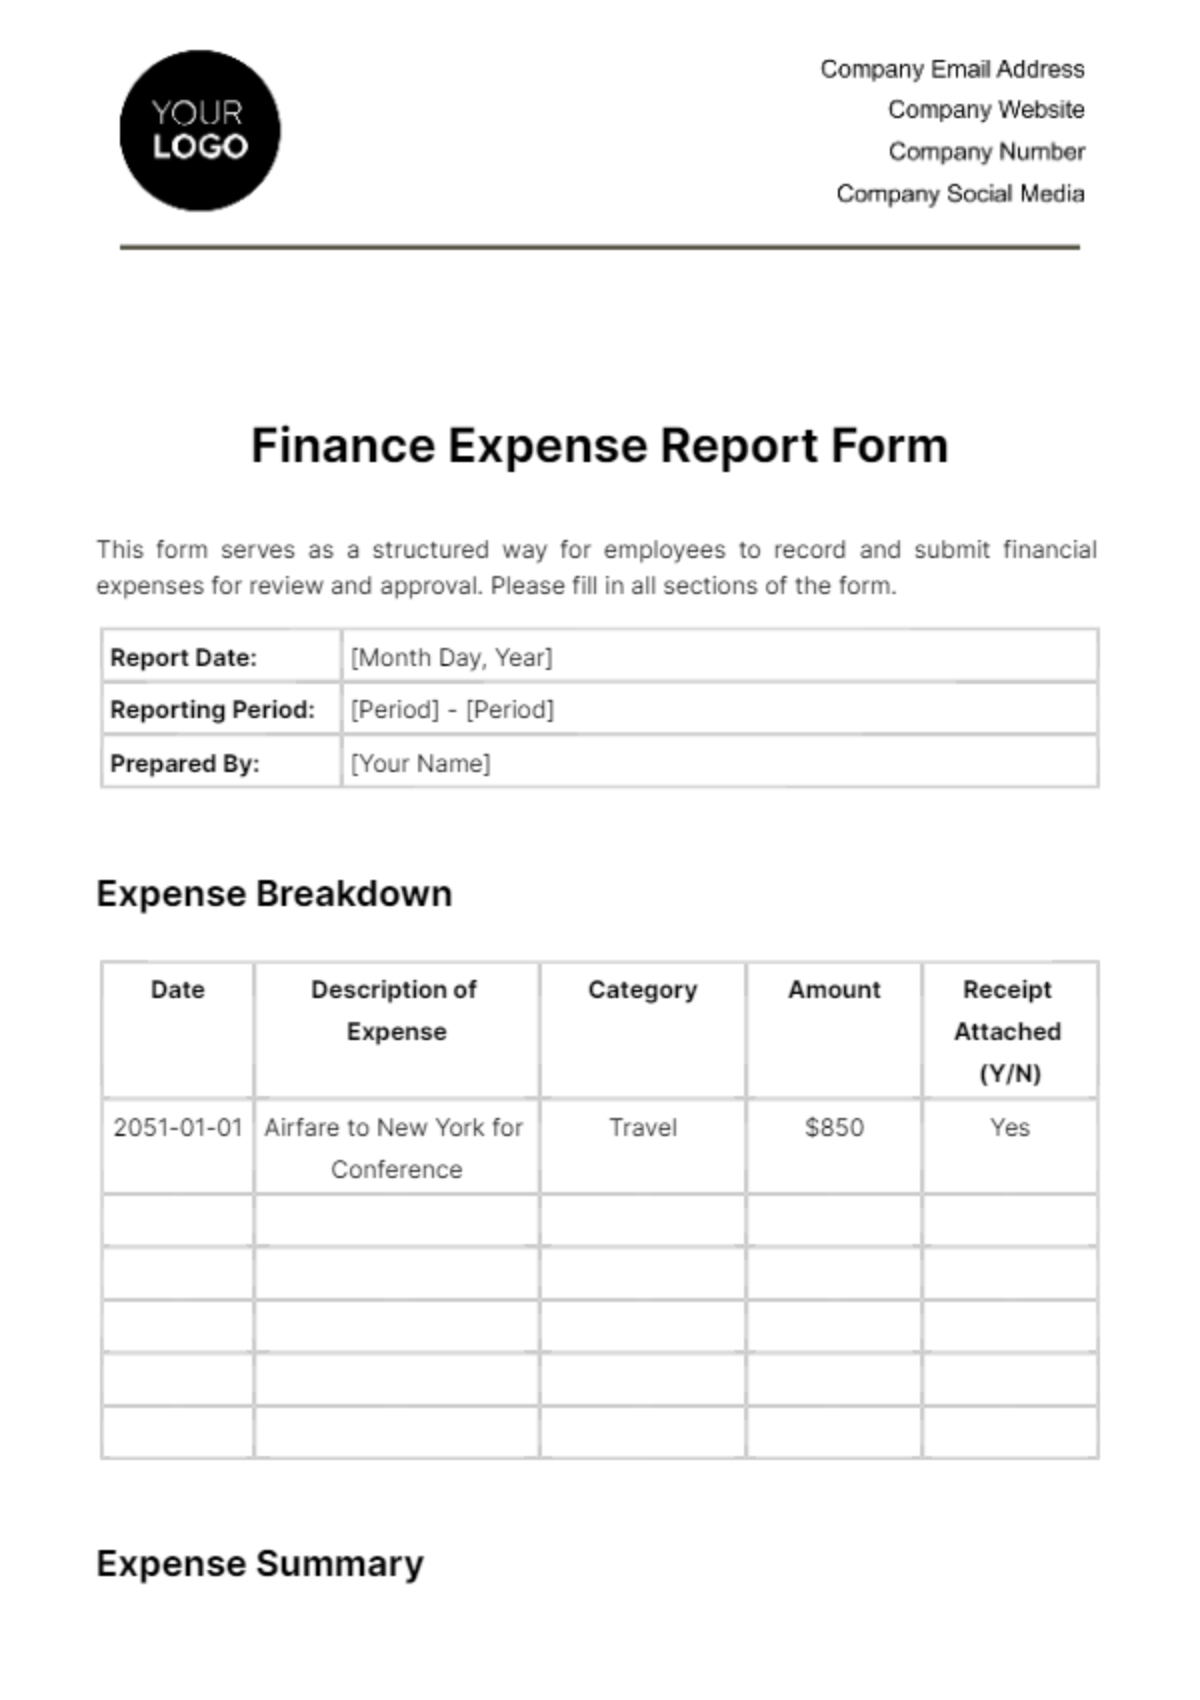 Free Finance Expense Report Form Template